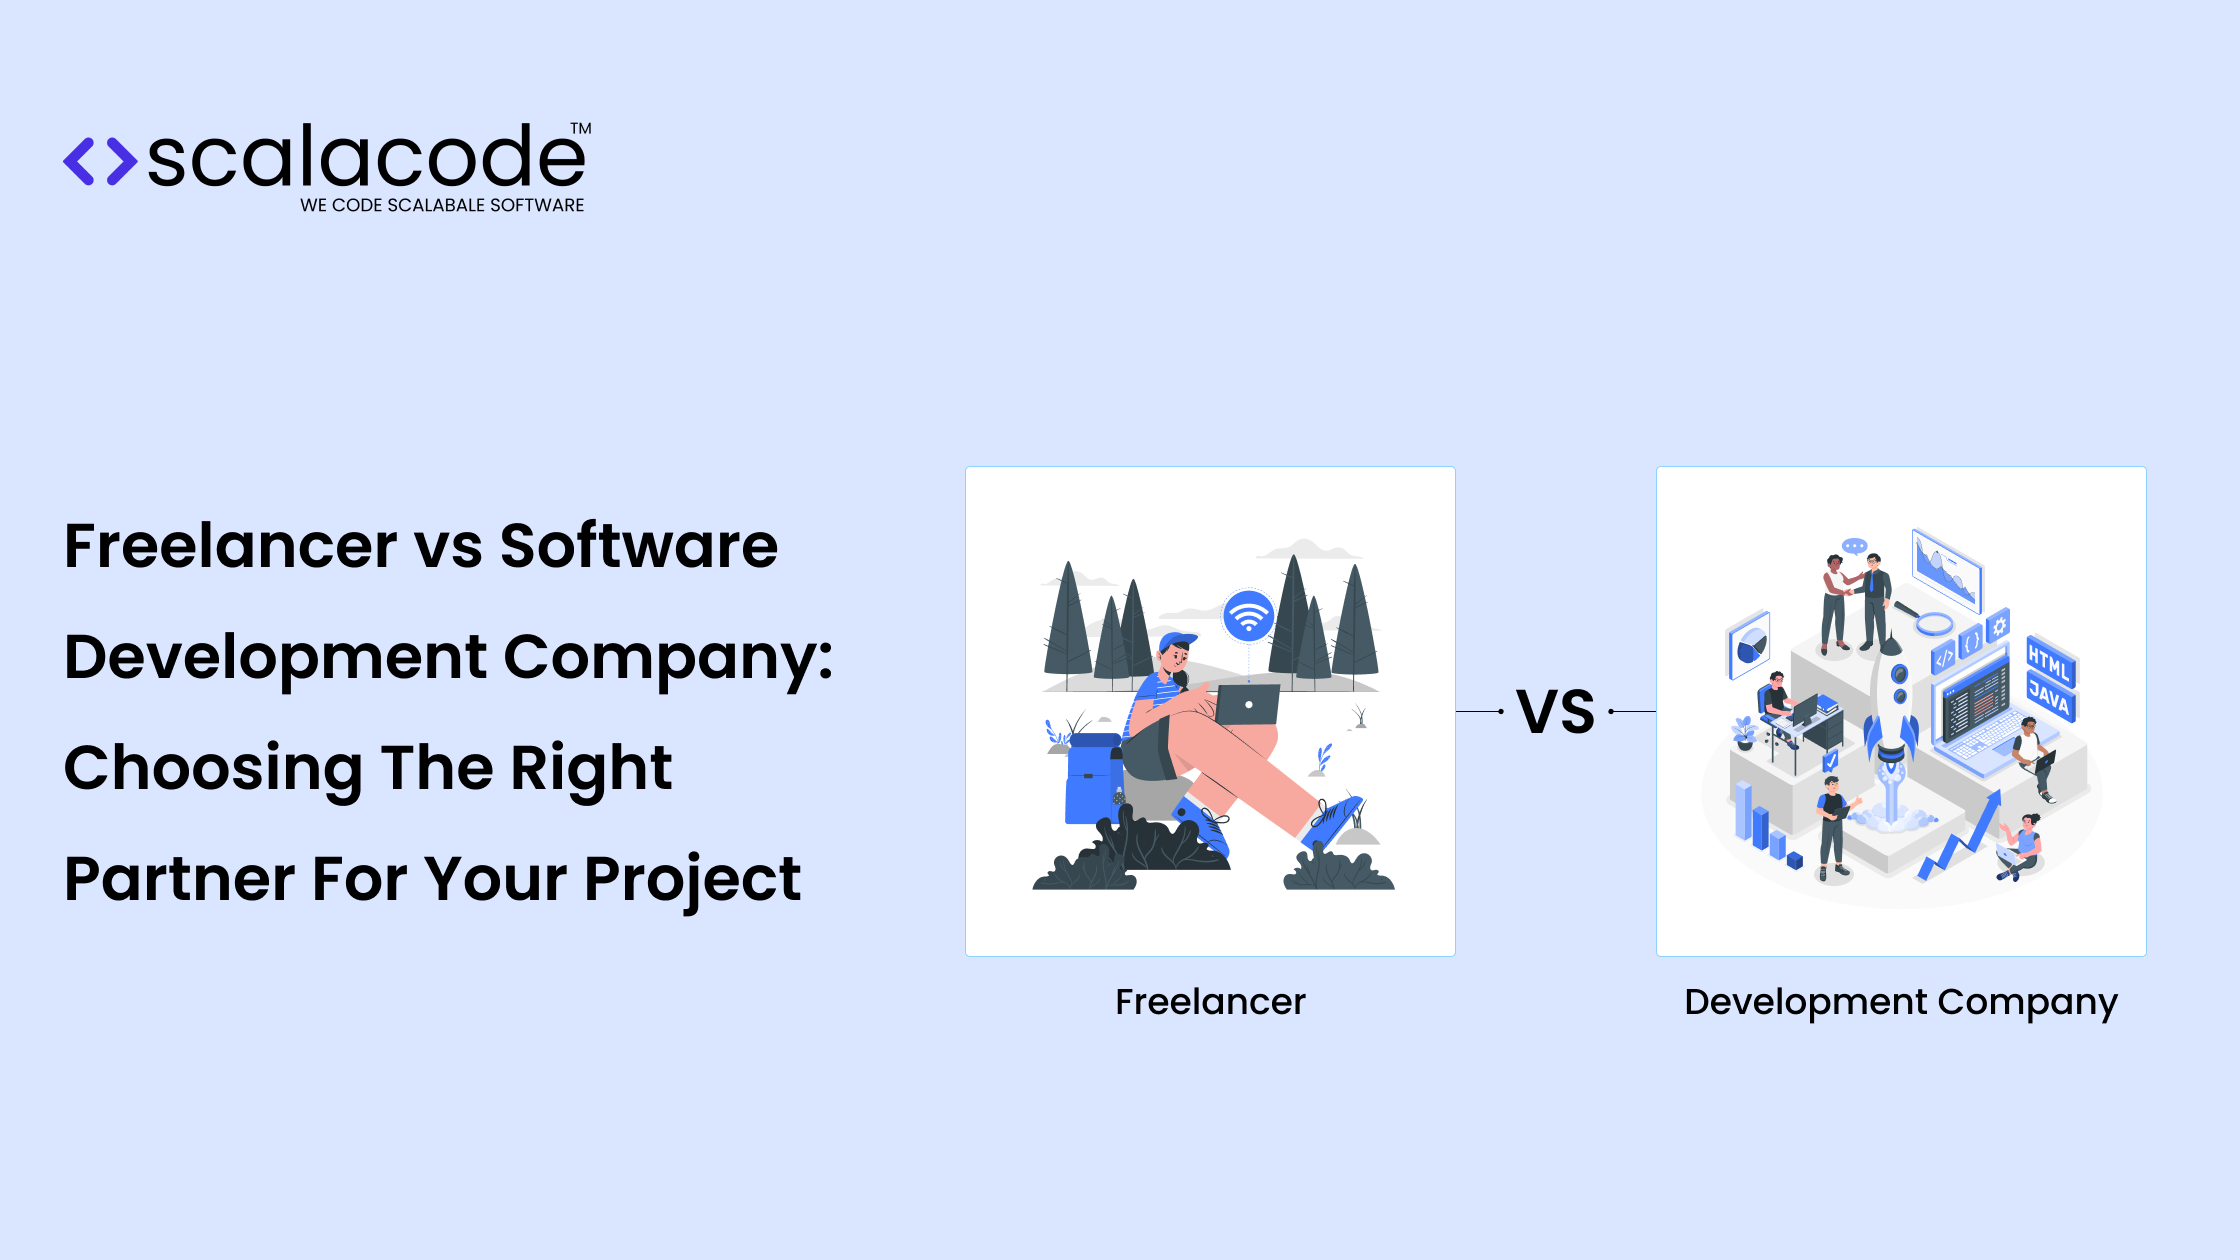 Freelancer vs. Software Development Company: Choosing The Right Partner For Your Project